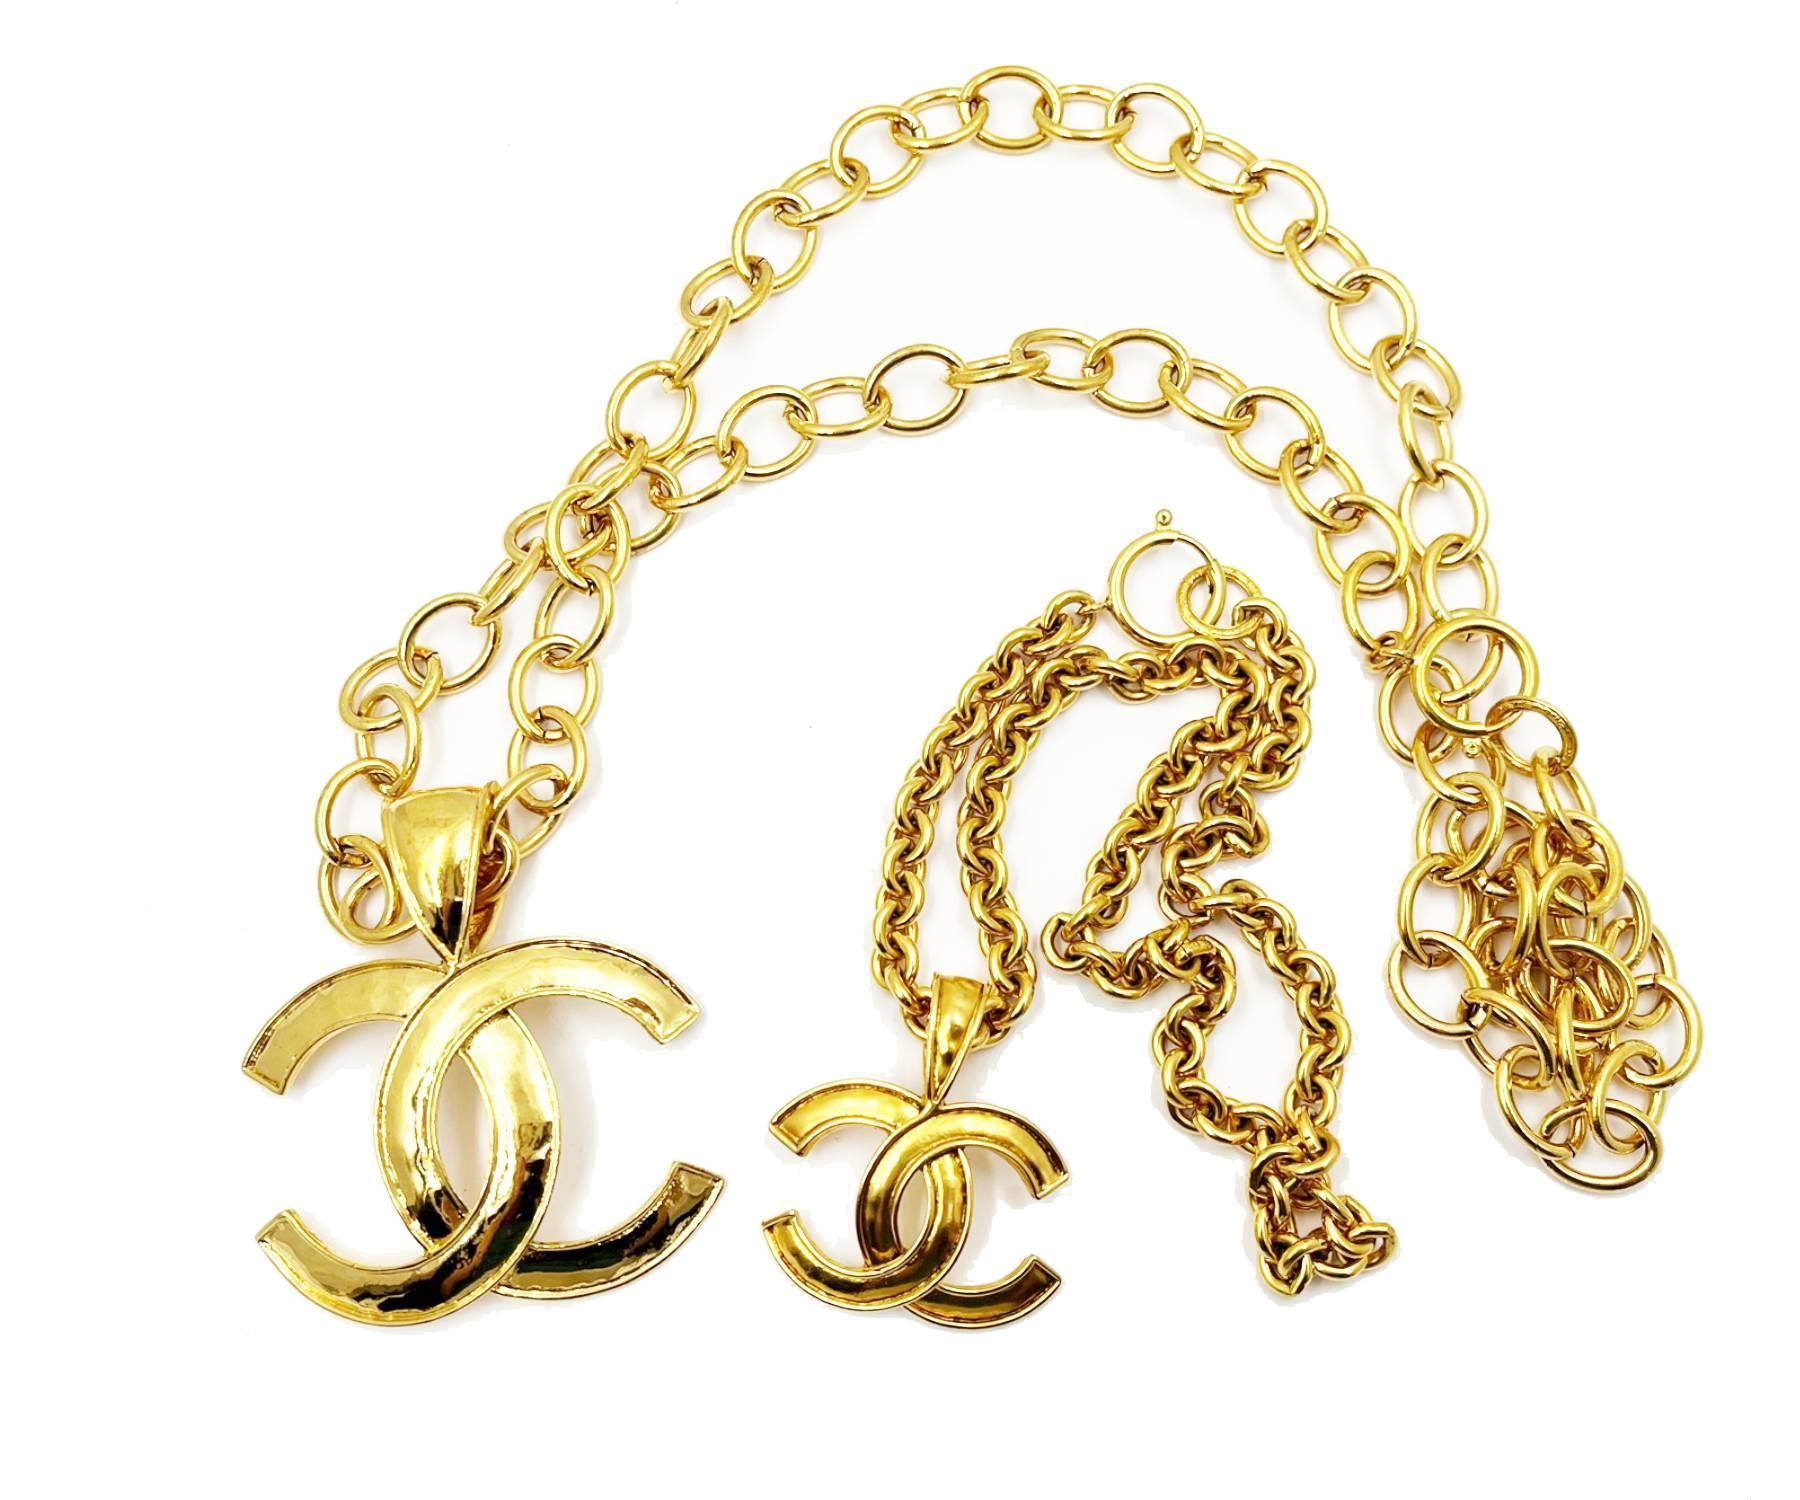 Chanel 2 Vintage Gold Plated CC Big Small Pendant Necklaces Set

*Marked 94
*Made in France
*Comes with the original box

-The large pendant necklace is approximately 32″ long, pendant is about 2.75″ x 2″.
-The small pendant necklace is